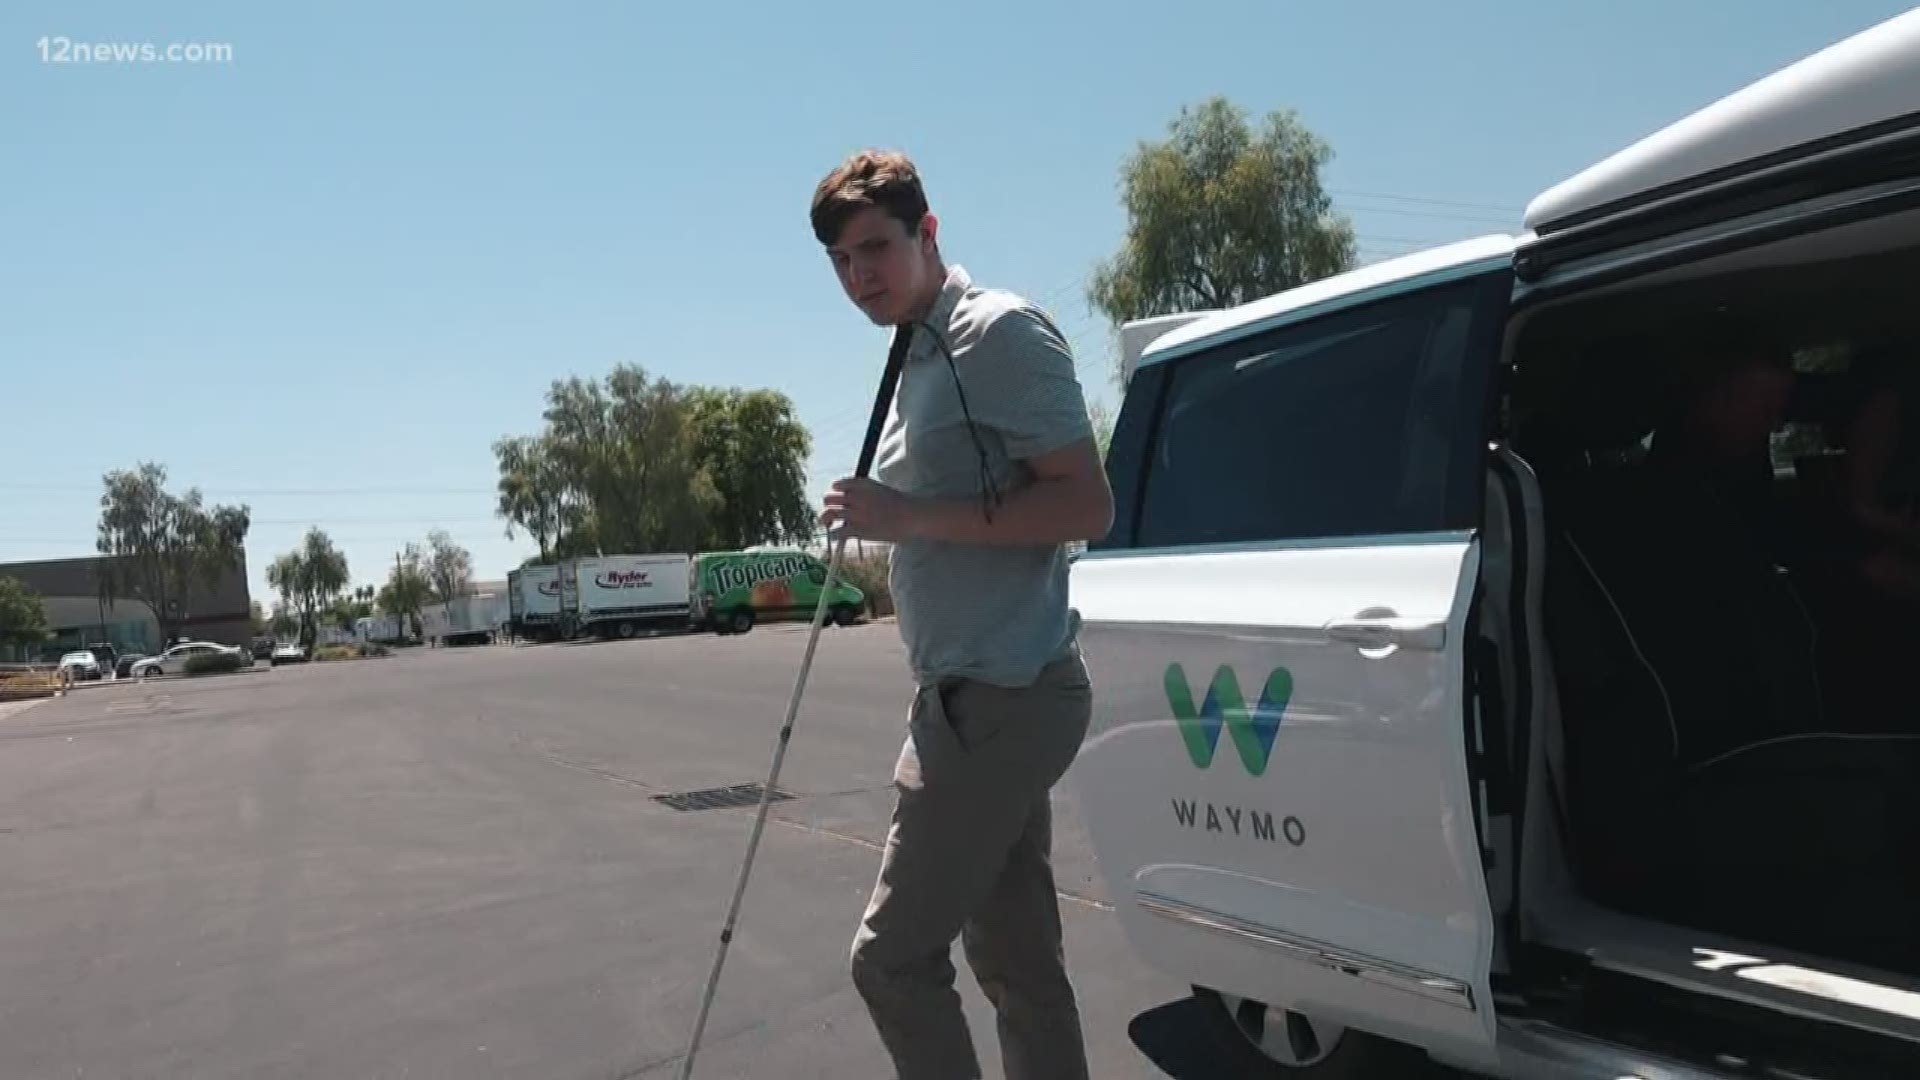 You've probably seen Waymo's driverless cars on the road in the East Valley. Now, Waymo is pushing its cars as a way to help people with disabilities get around. 12 News went for a ride in an autonomous car with one man who believes Waymo could change his life.